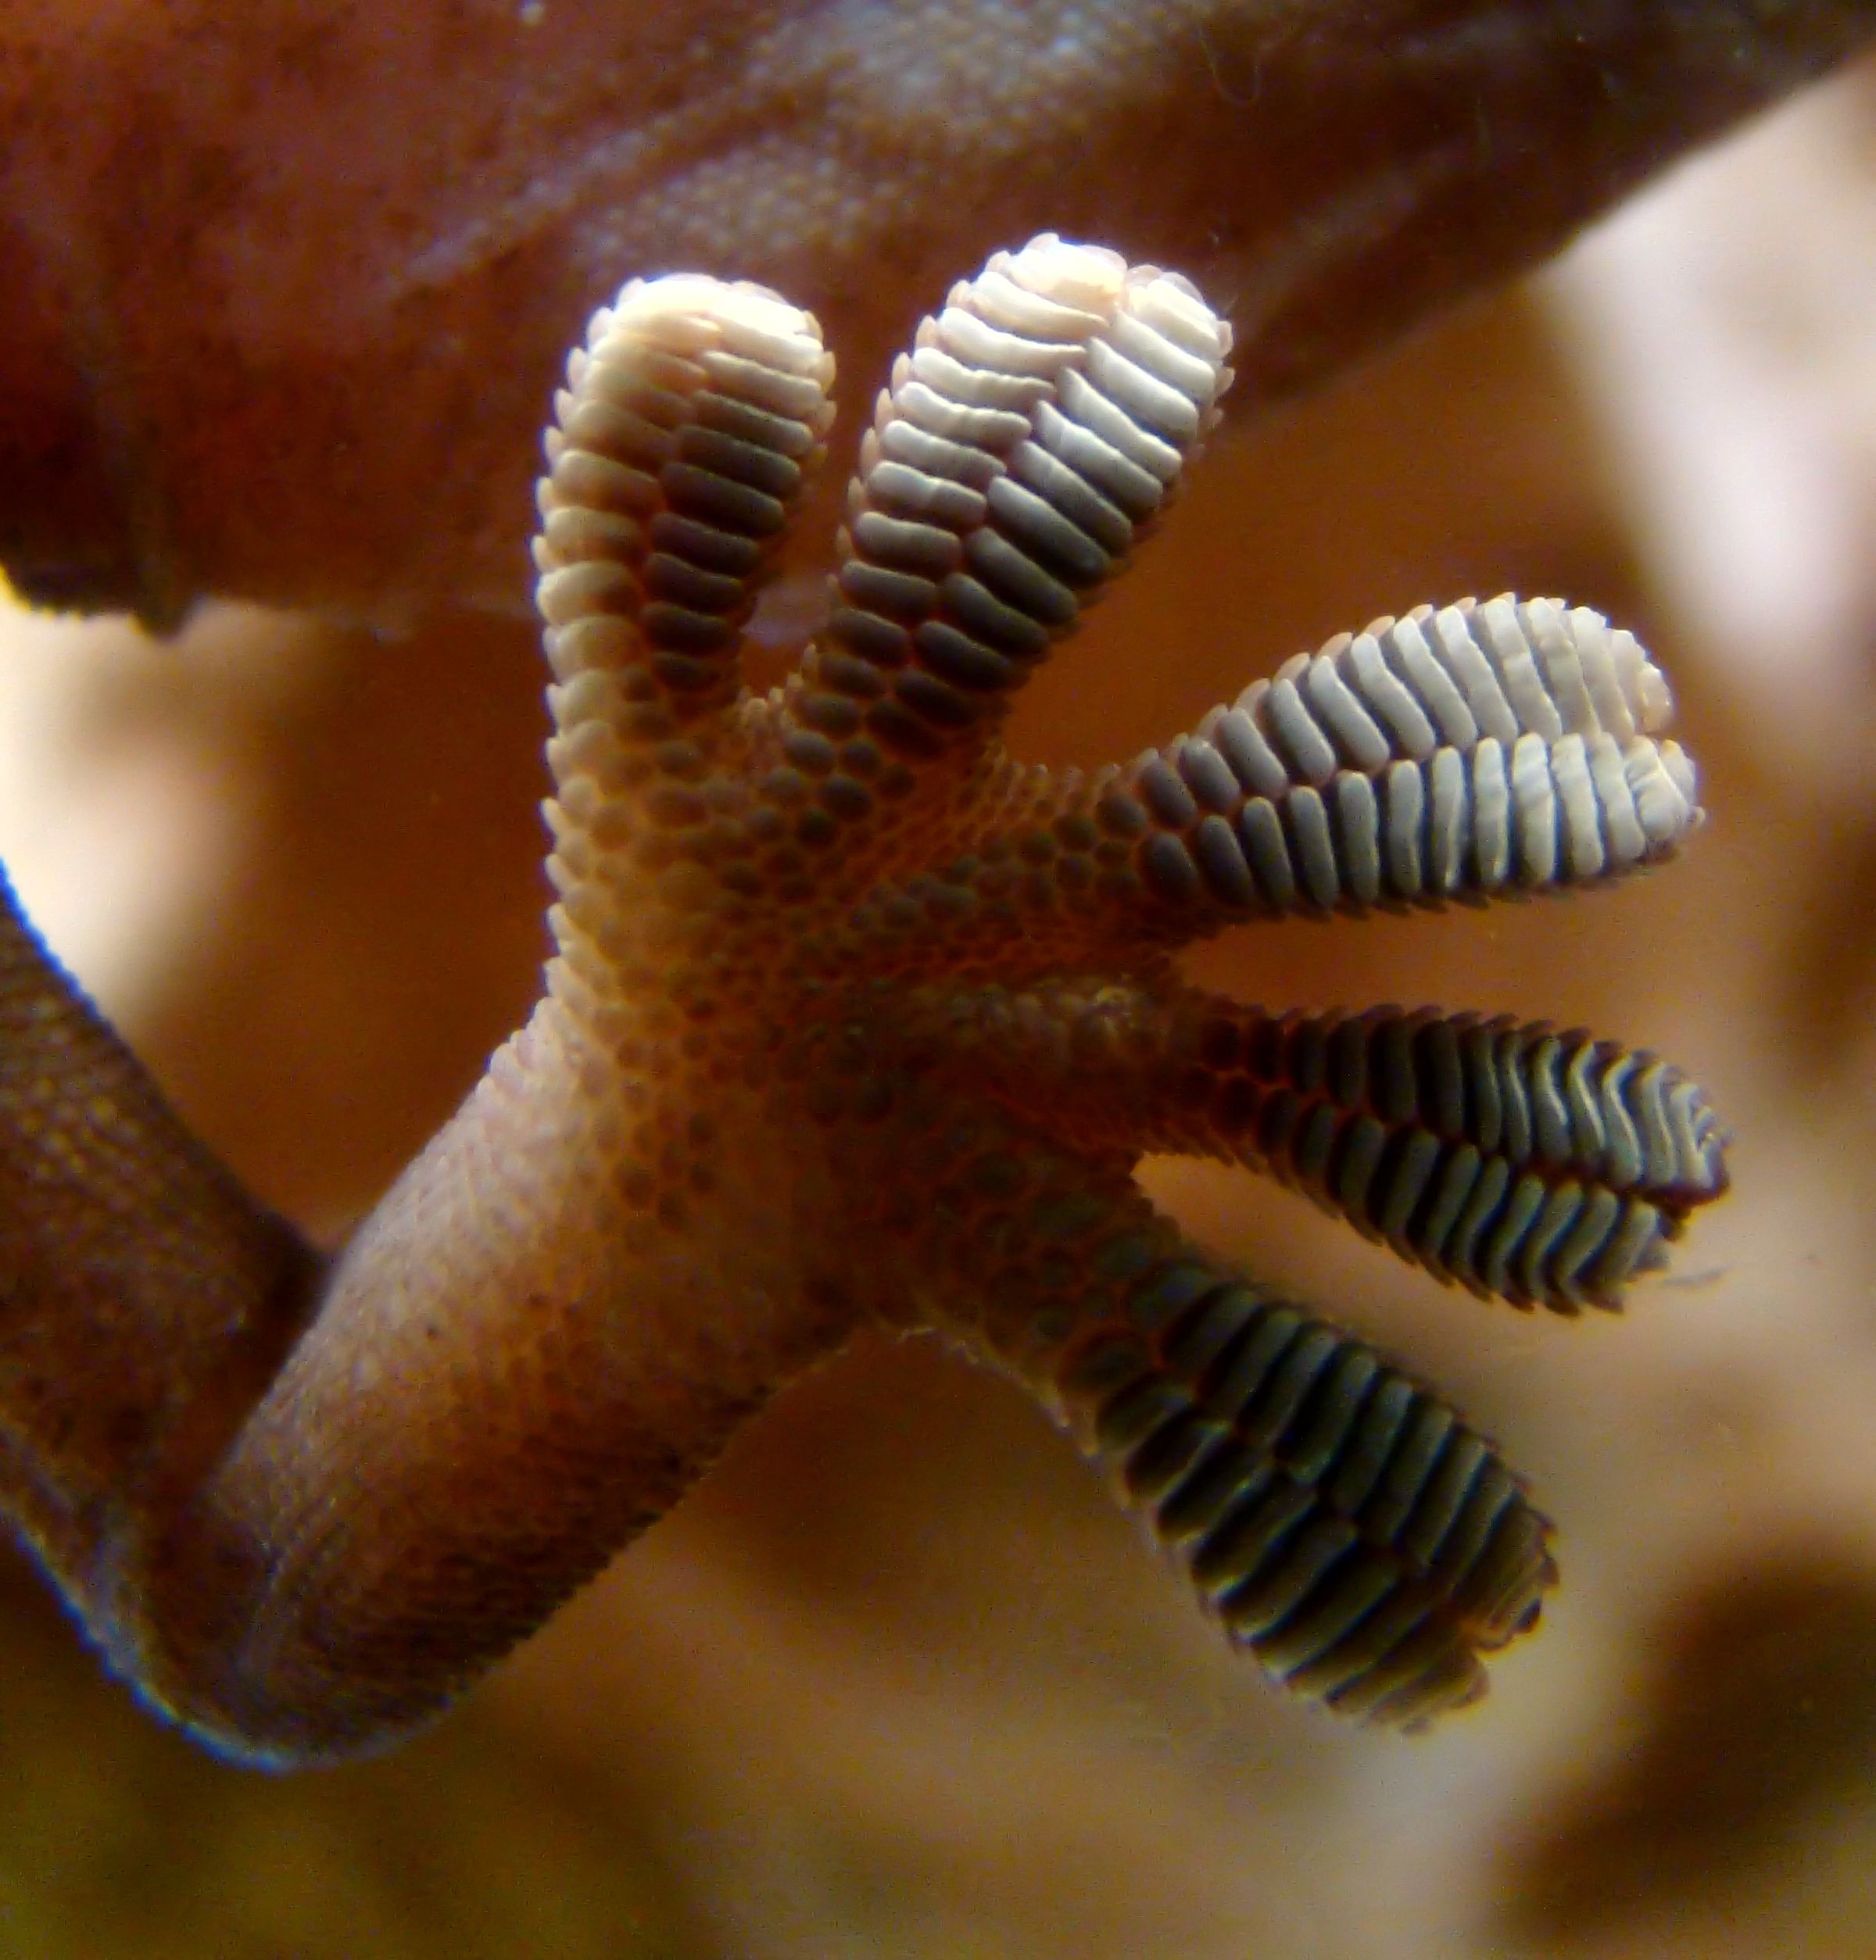 The structure of a gecko’s foot, which contains thousands of microscope hairs that create van der Waals forces.